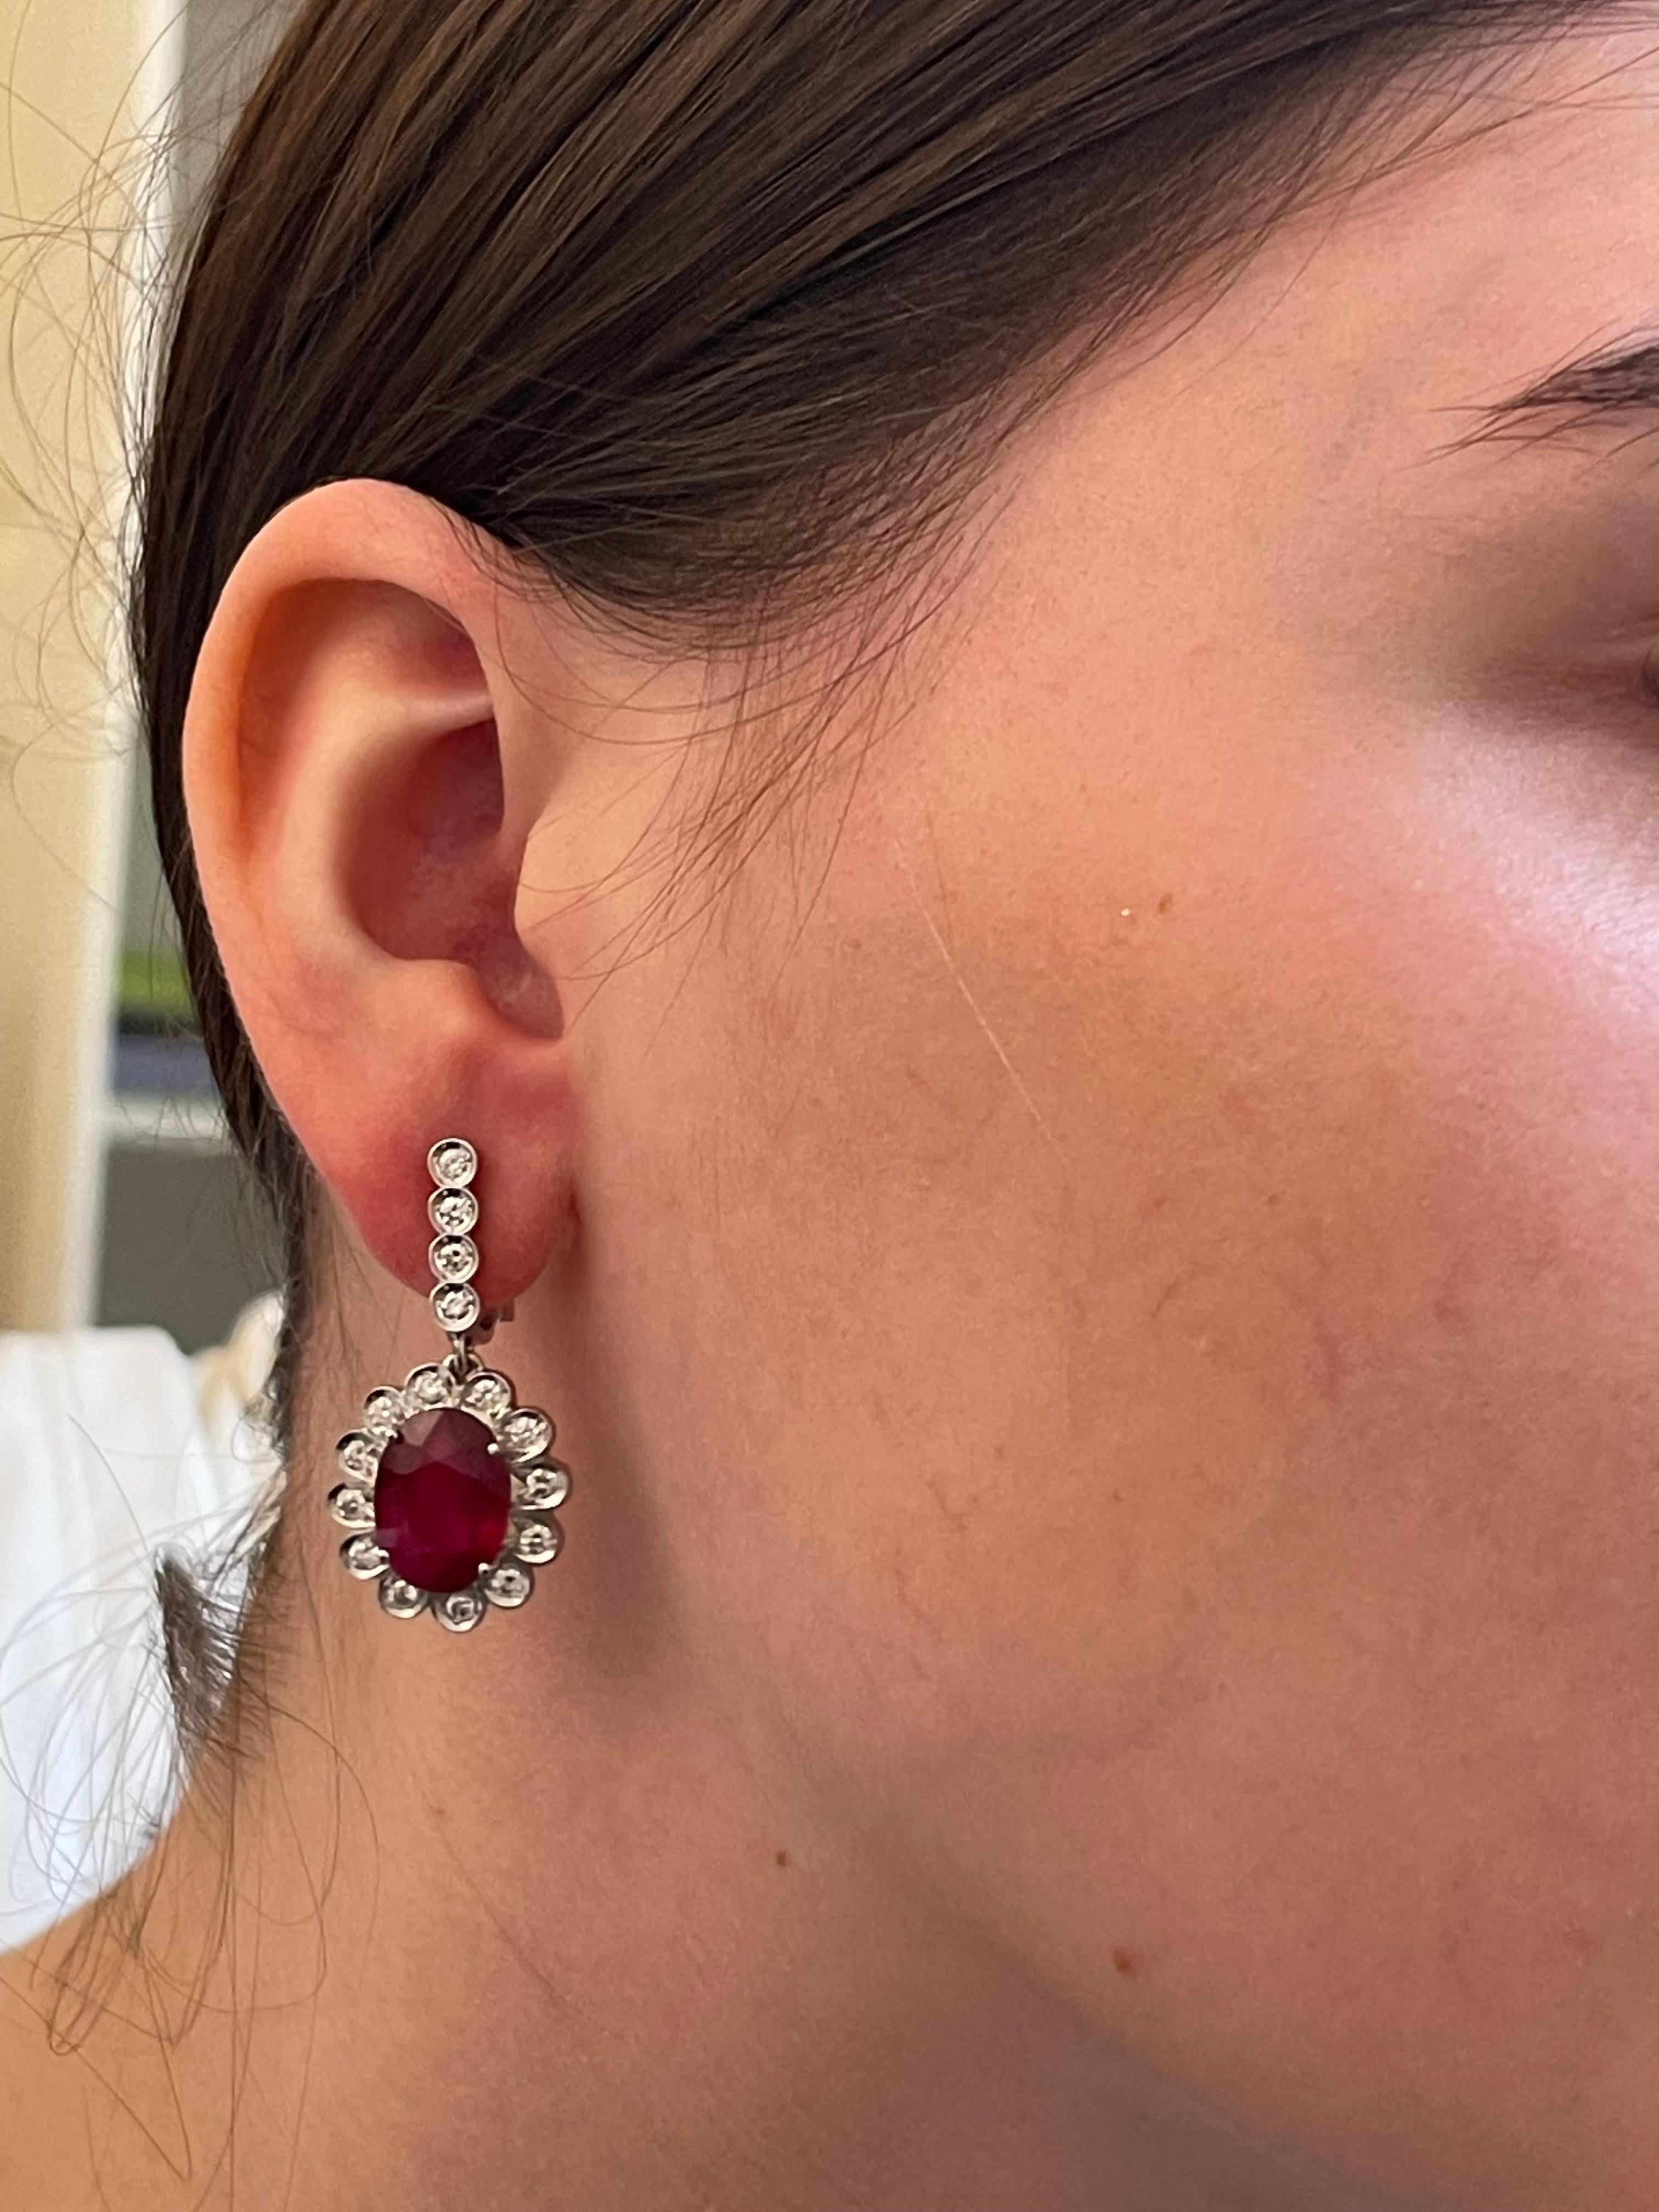 Earrings White Gold 18 K Gianni Lazzaro

Diamonds 32-1,21 ct HSI 
Ruby 2-14,53ct.

With a heritage of ancient fine Swiss jewelry traditions, NATKINA is a Geneva-based jewelry brand that creates modern jewelry masterpieces suitable for everyday